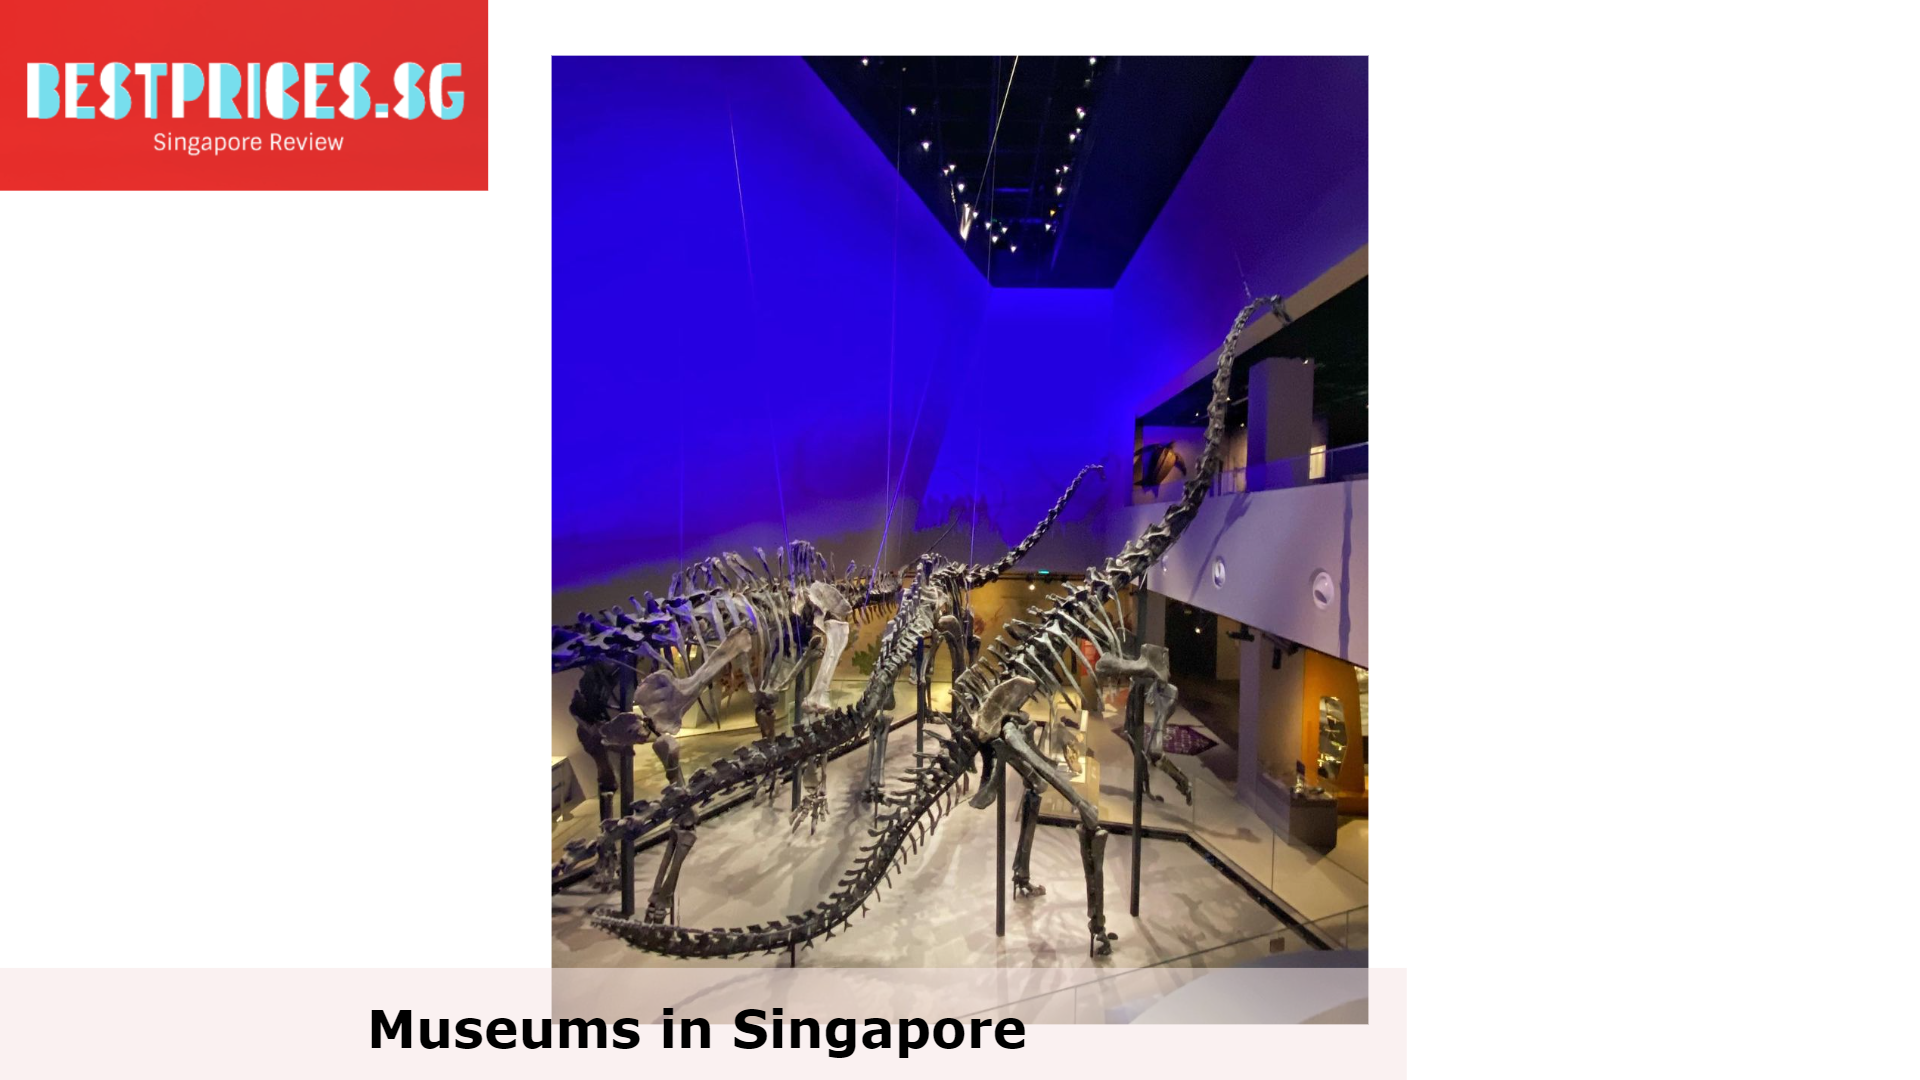 Lee Kong Chian Natural History Museum - Museums in Singapore, Singapore Museums, museums in singapore, best museums to visit in Singapore, best museums art galleries in Singapore to explore, Which museums are free in Singapore?, Are there any museums in Singapore?, How much is a ticket to National Museum of Singapore?, Whats on in National Museum Singapore?, Which experiences are best for museums in Singapore?, What are the best places for museums in Singapore?, singapore art museum, parkview museum, art science museum singapore, museum exhibitions singapore, museums singapore free, museums singapore opening hours, 